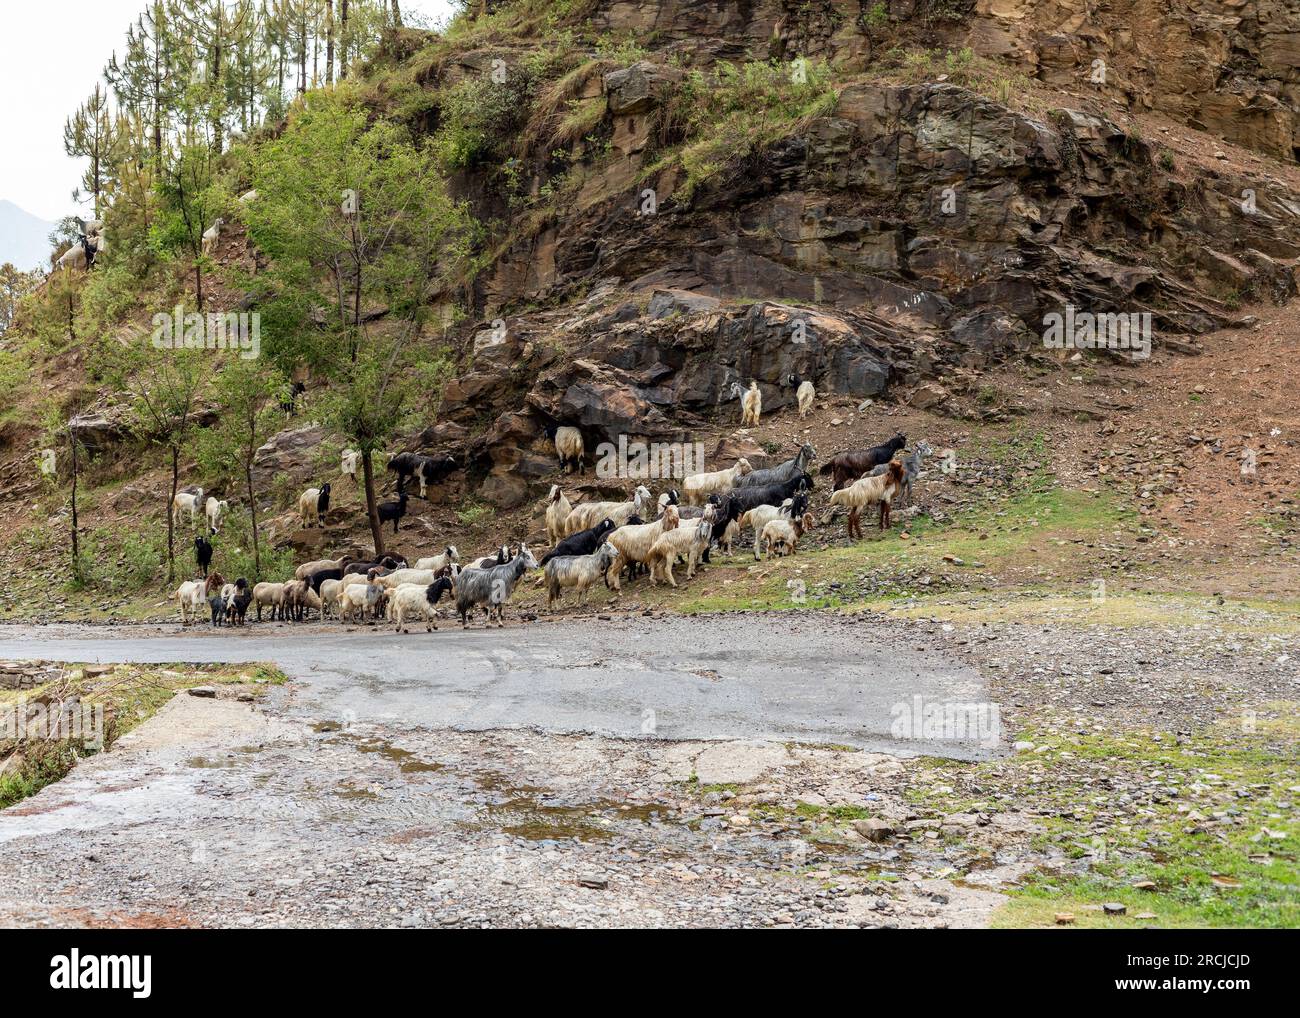 A flock of sheep grazing the grass on a roadside in the rain. Stock Photo